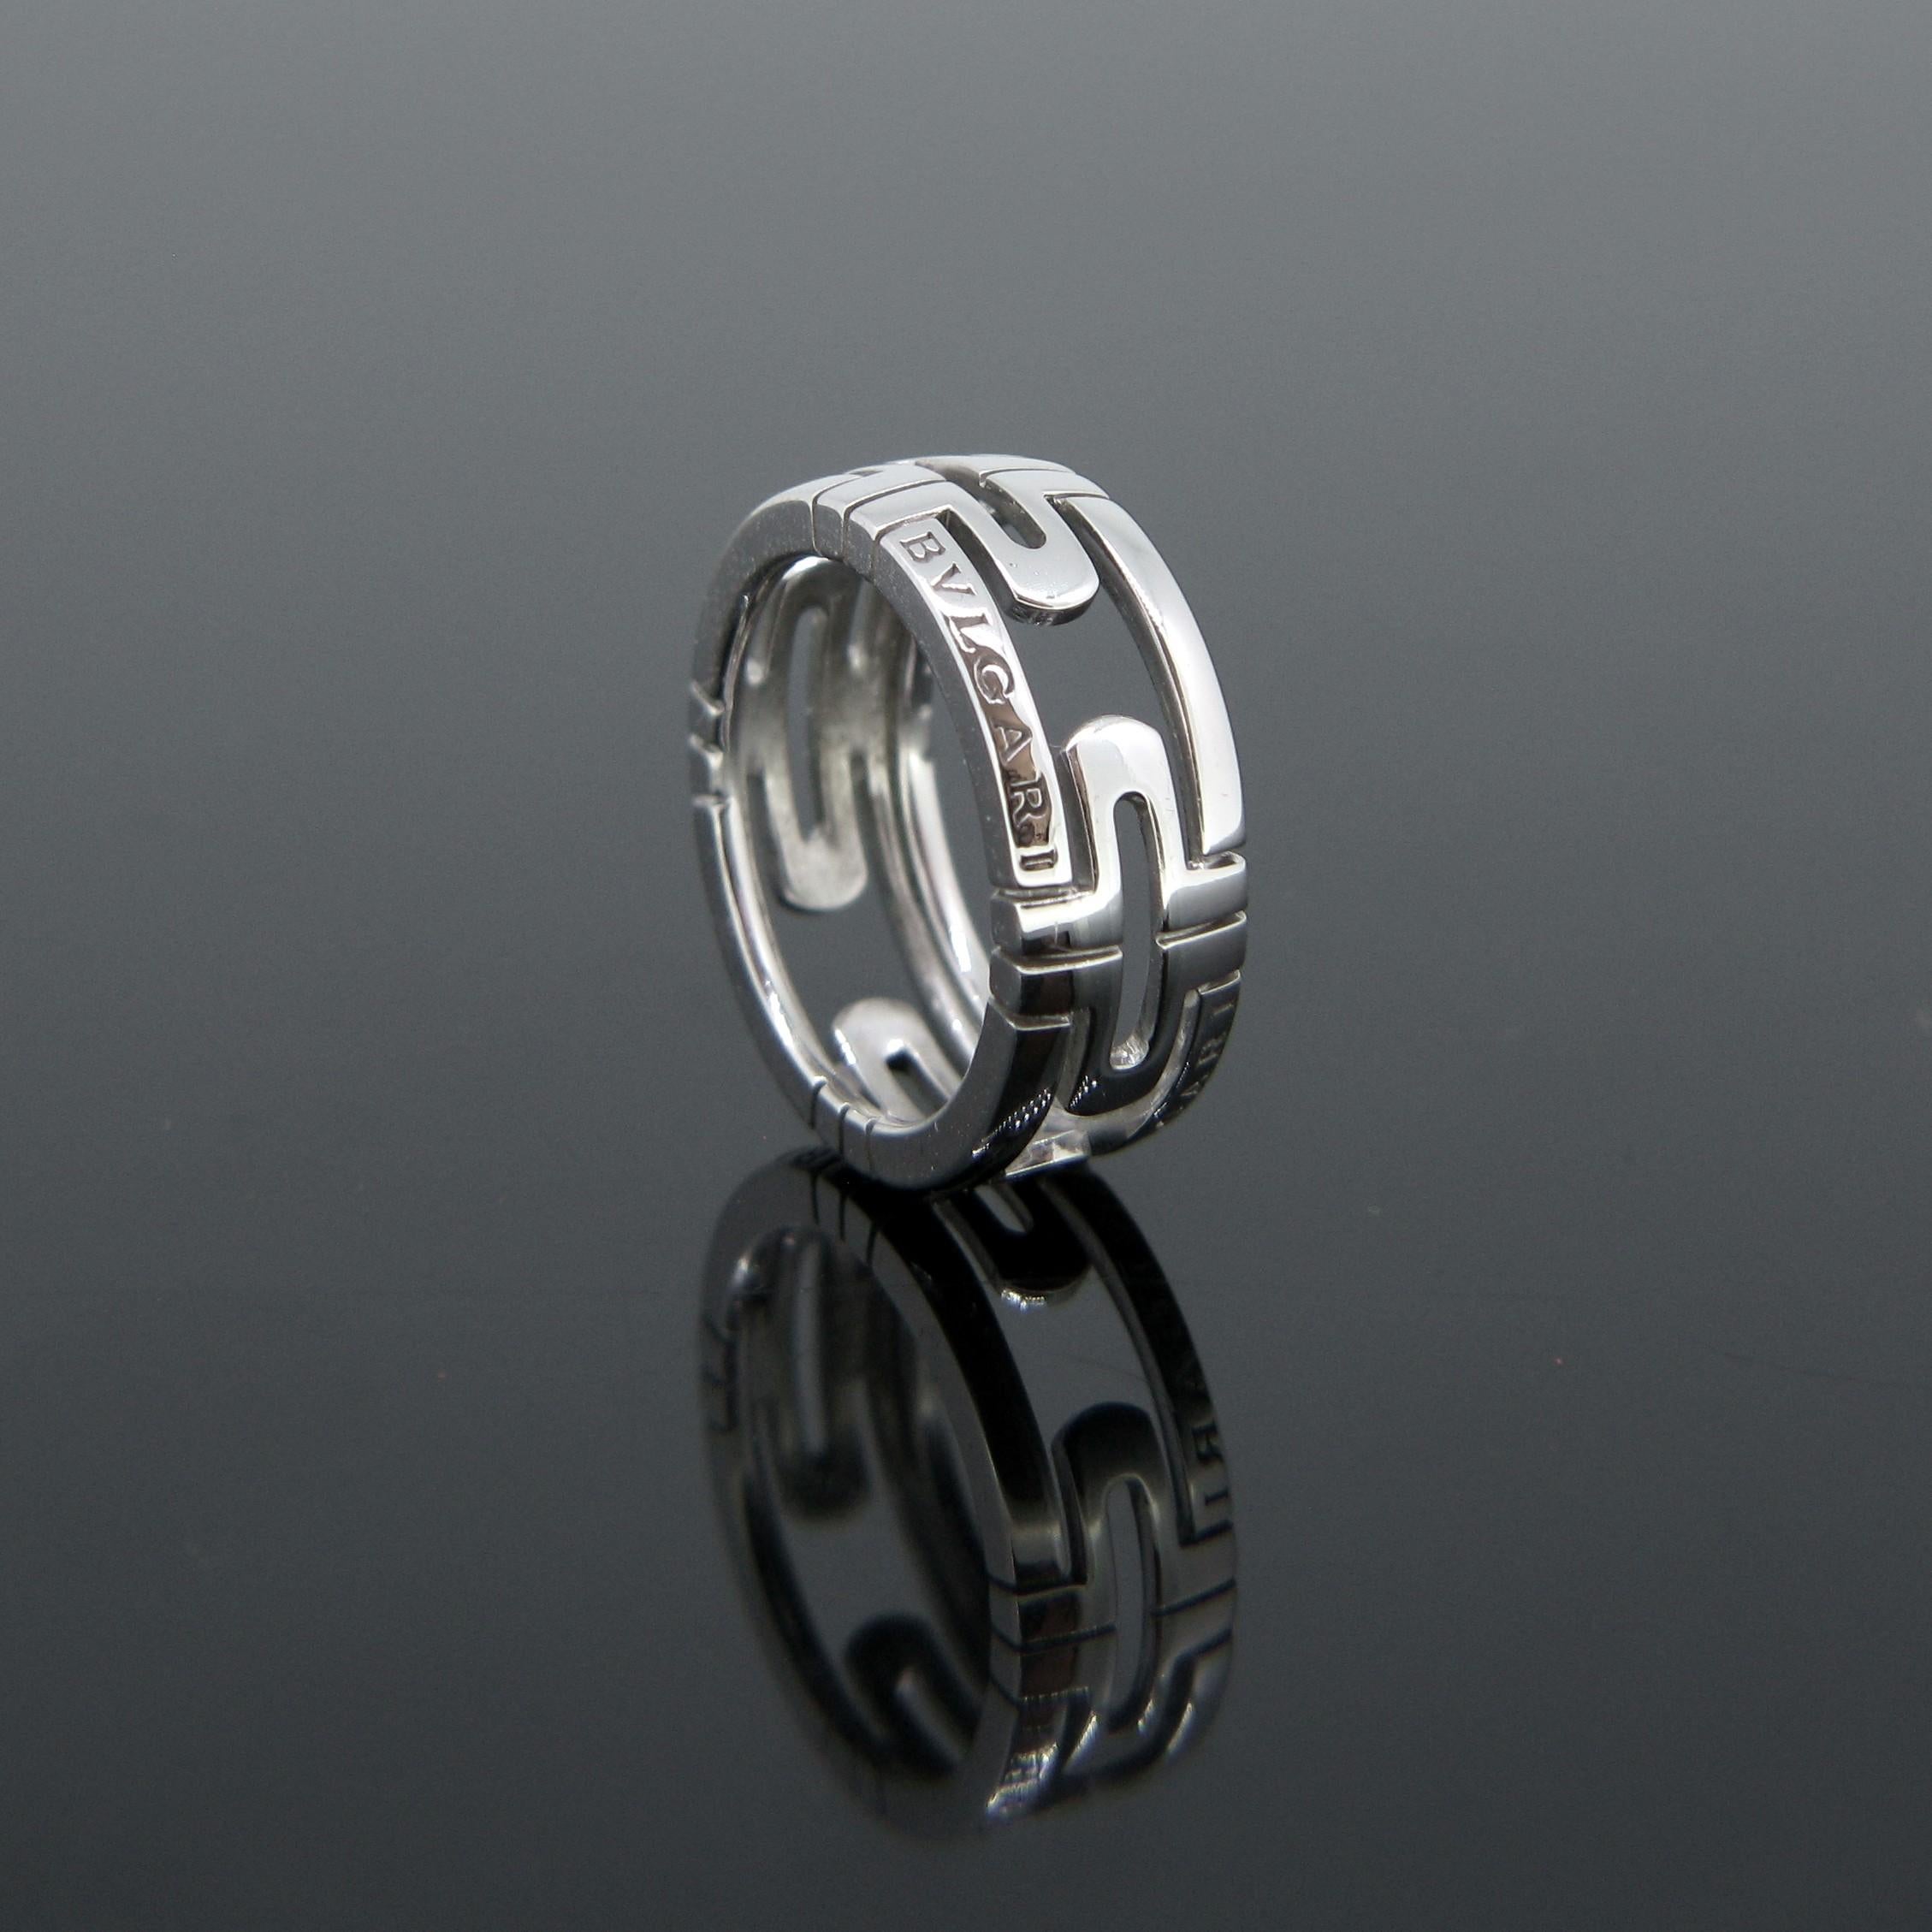 This band ring from Bulgari is from the collection called Parentesi. It is fully made in 18kt white gold. The design of the Parentesi ring is inspired by the travertine junctions of the roman pavements. This unmistakable motif, originating in the